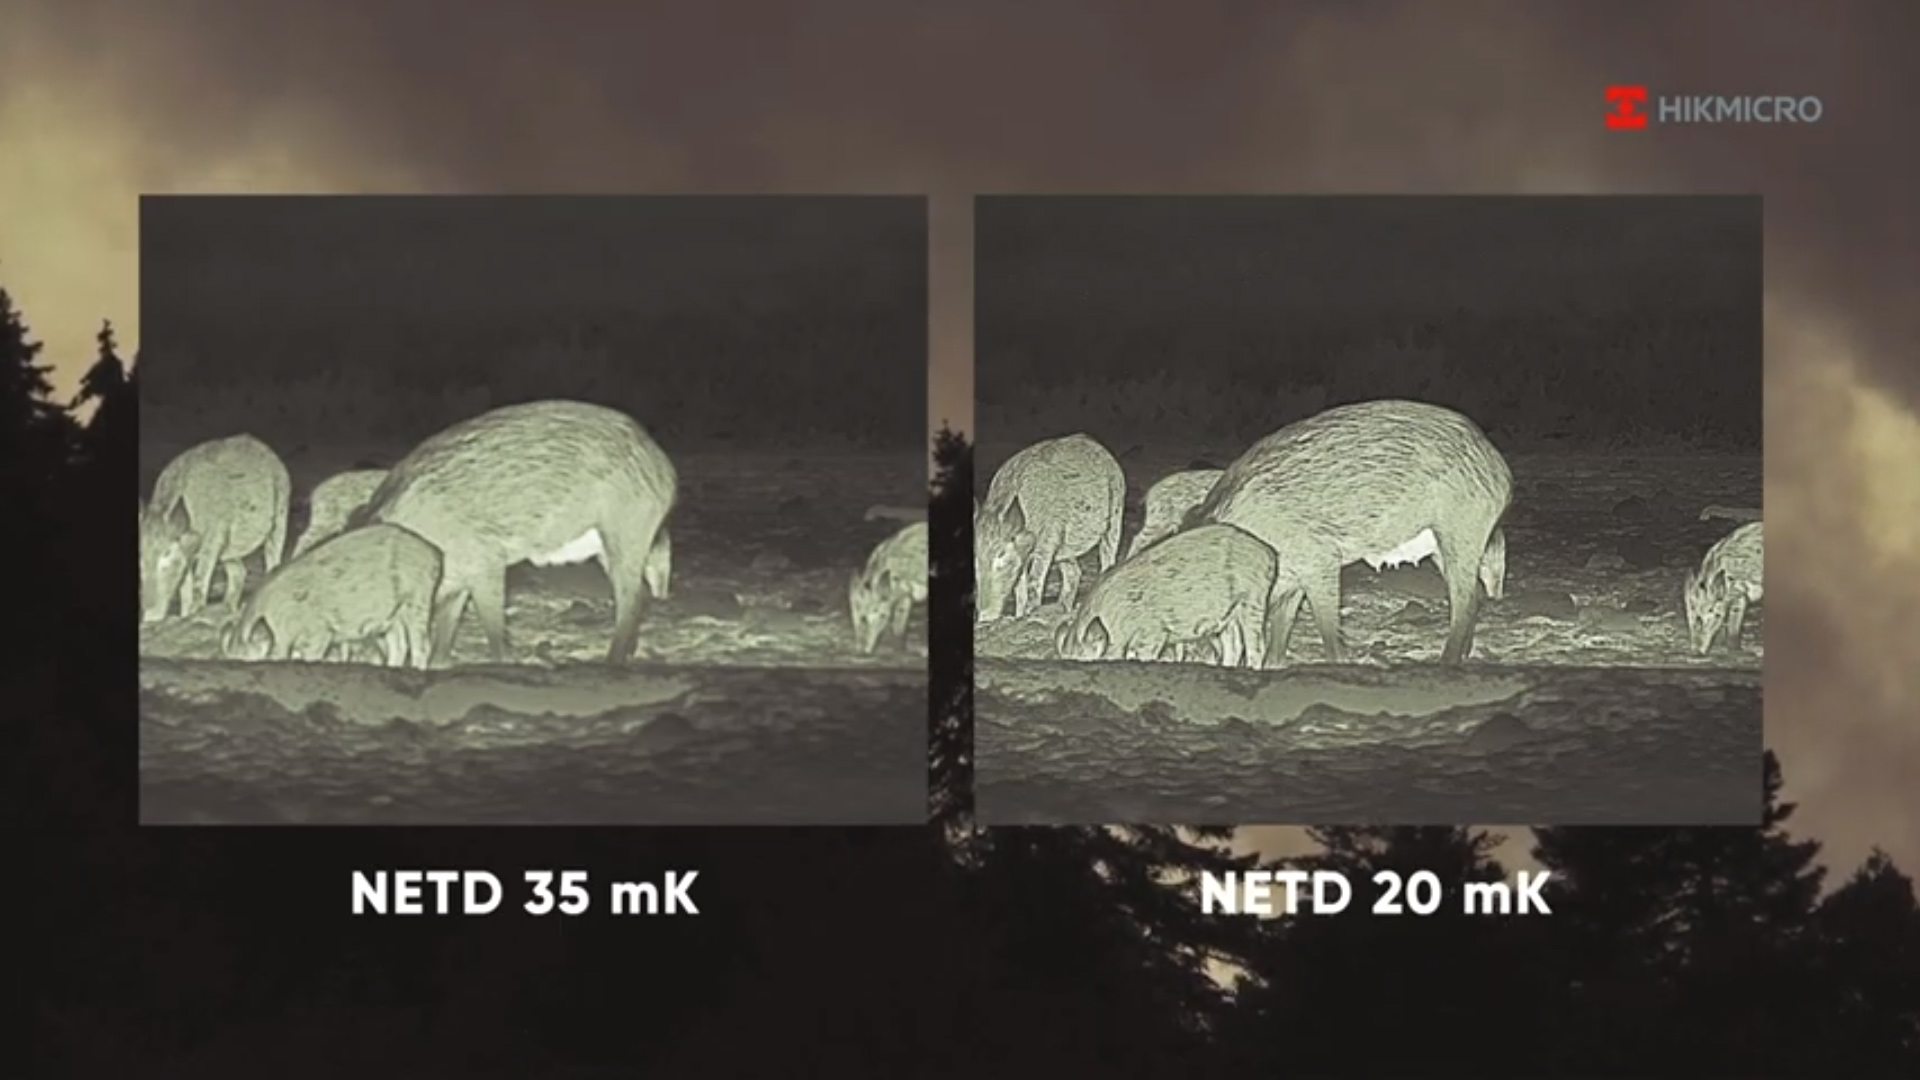 An image showing the difference betweeen NETD 35 mk and NETD 20 mK.